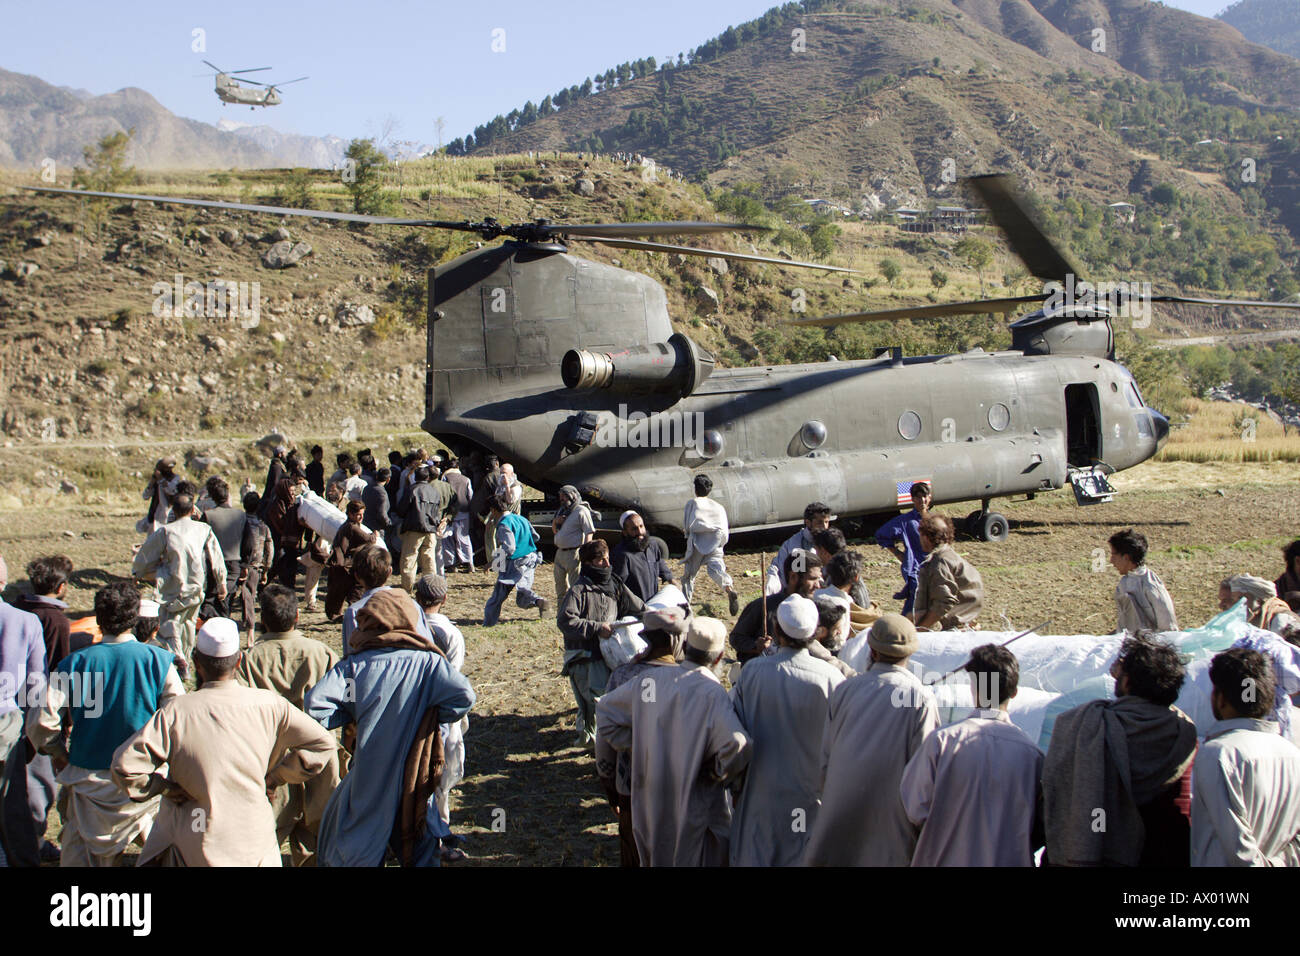 People in the earthquake area waiting for aid supplies, Pamir Allai Tal, Pakistan Stock Photo